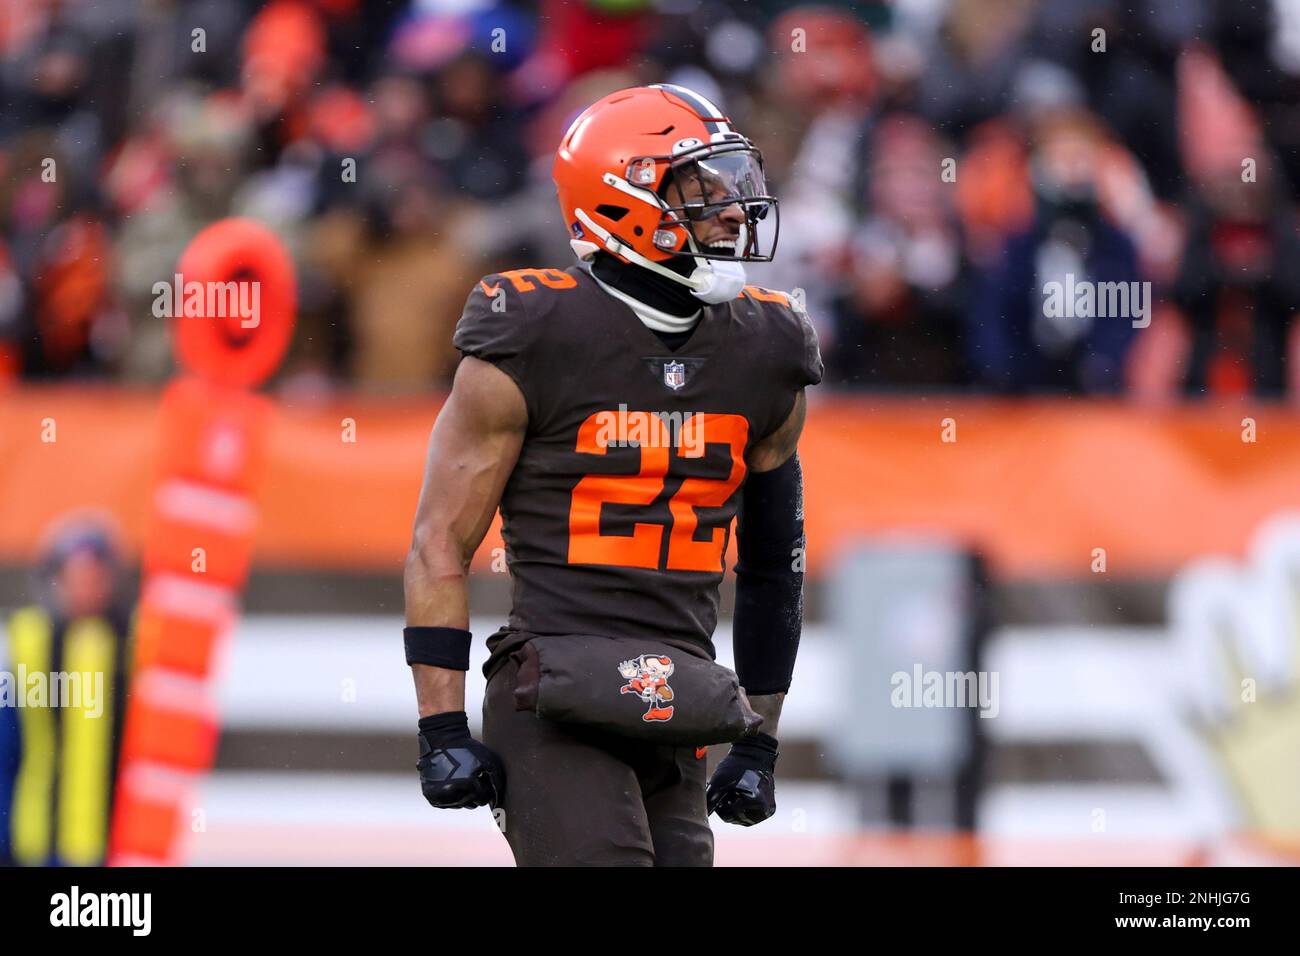 CLEVELAND, OH - DECEMBER 24: Cleveland Browns safety Grant Delpit (22)  celebrates after making a tackle during the third quarter of the National  Football League game between the New Orleans Saints and